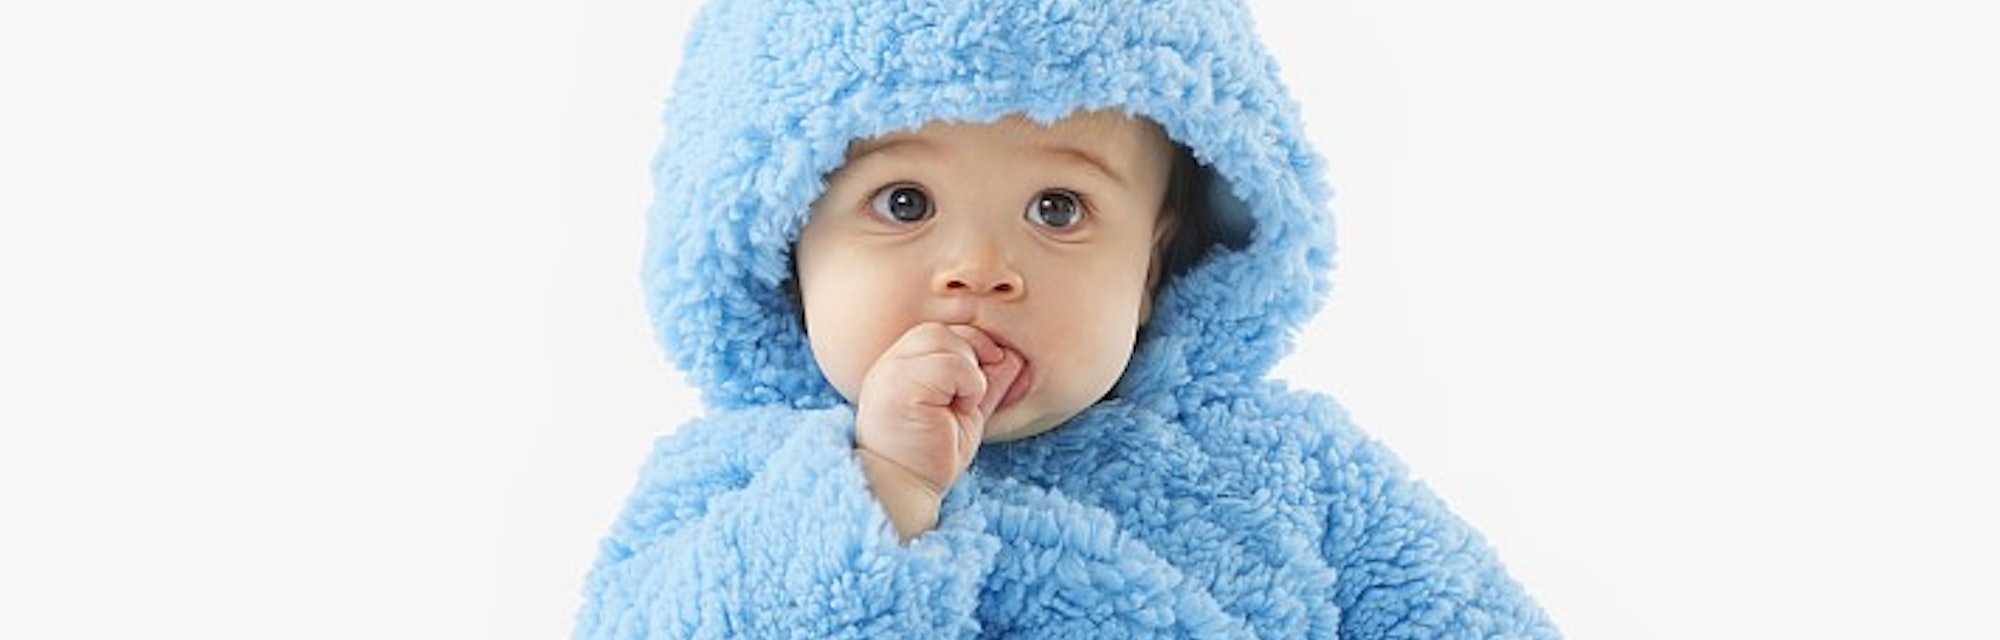 A baby in a blue fuzzy Cookie Monster Halloween costume in an article about Pottery Barn Halloween c...